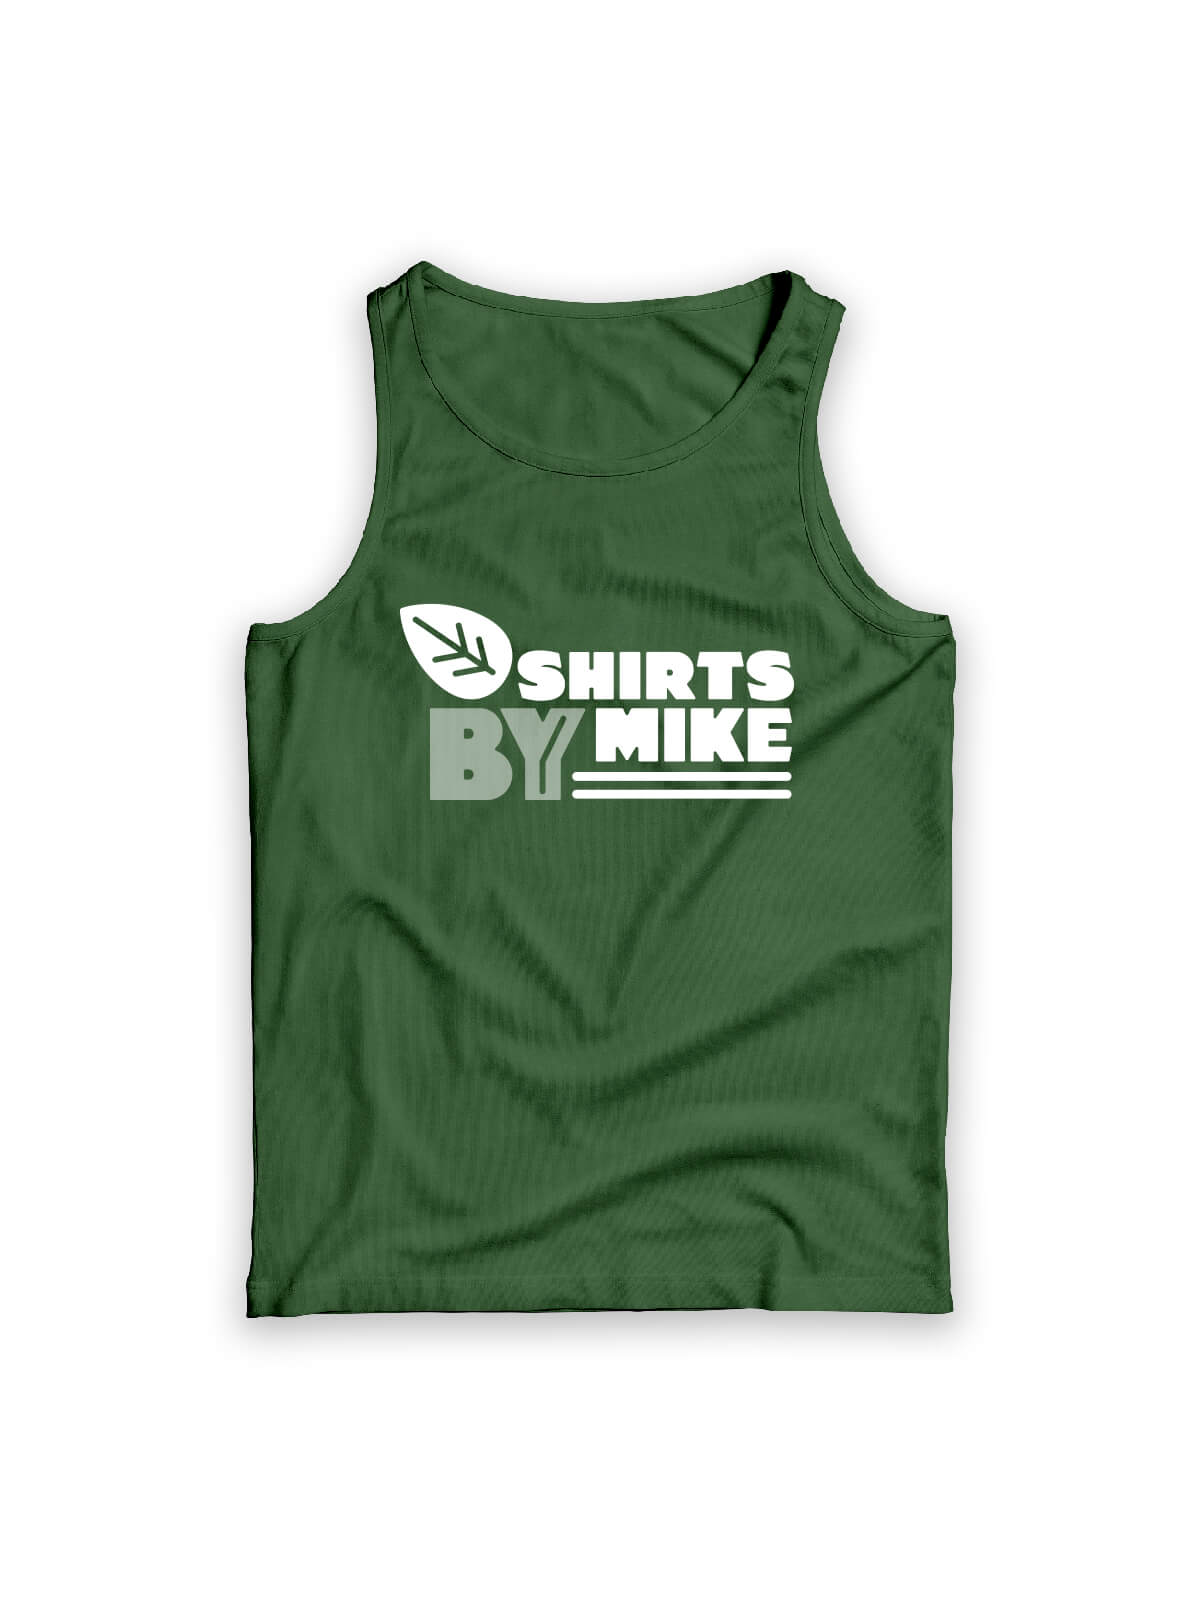 green tank top with Shirts By Mike logo